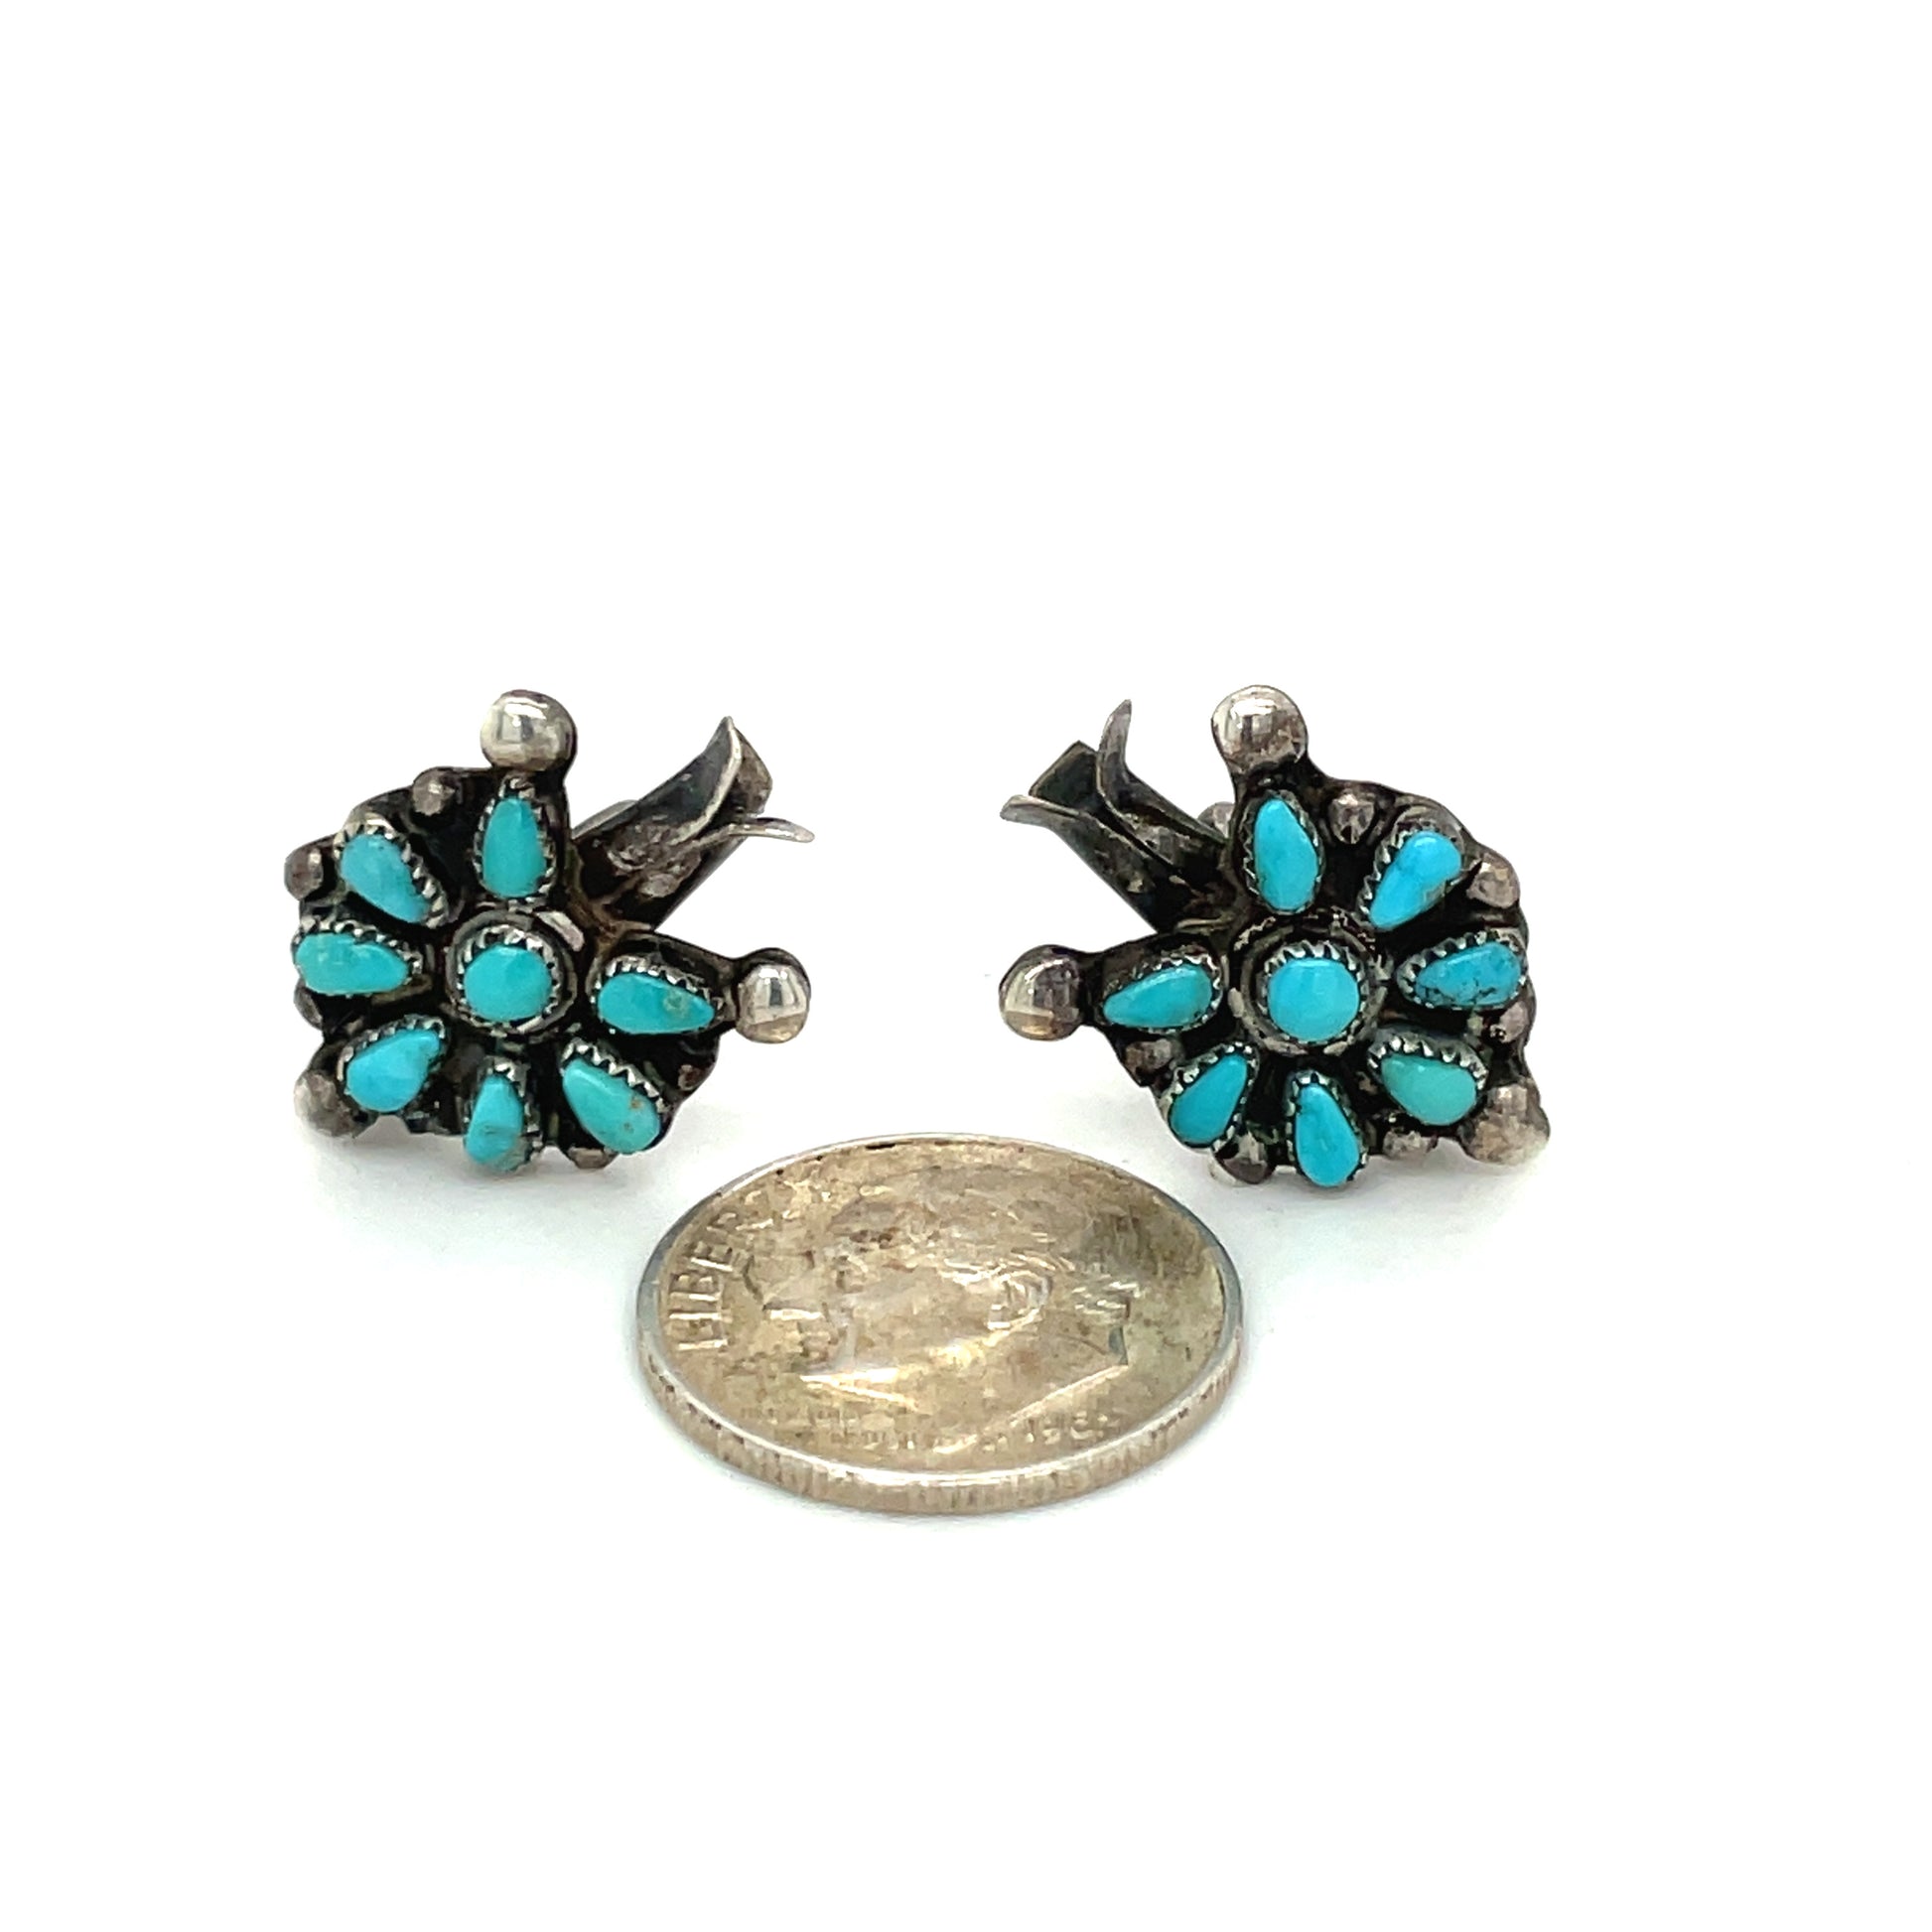 2 1940s Zuni Screw Back Earrings of Turquoise and Coral In